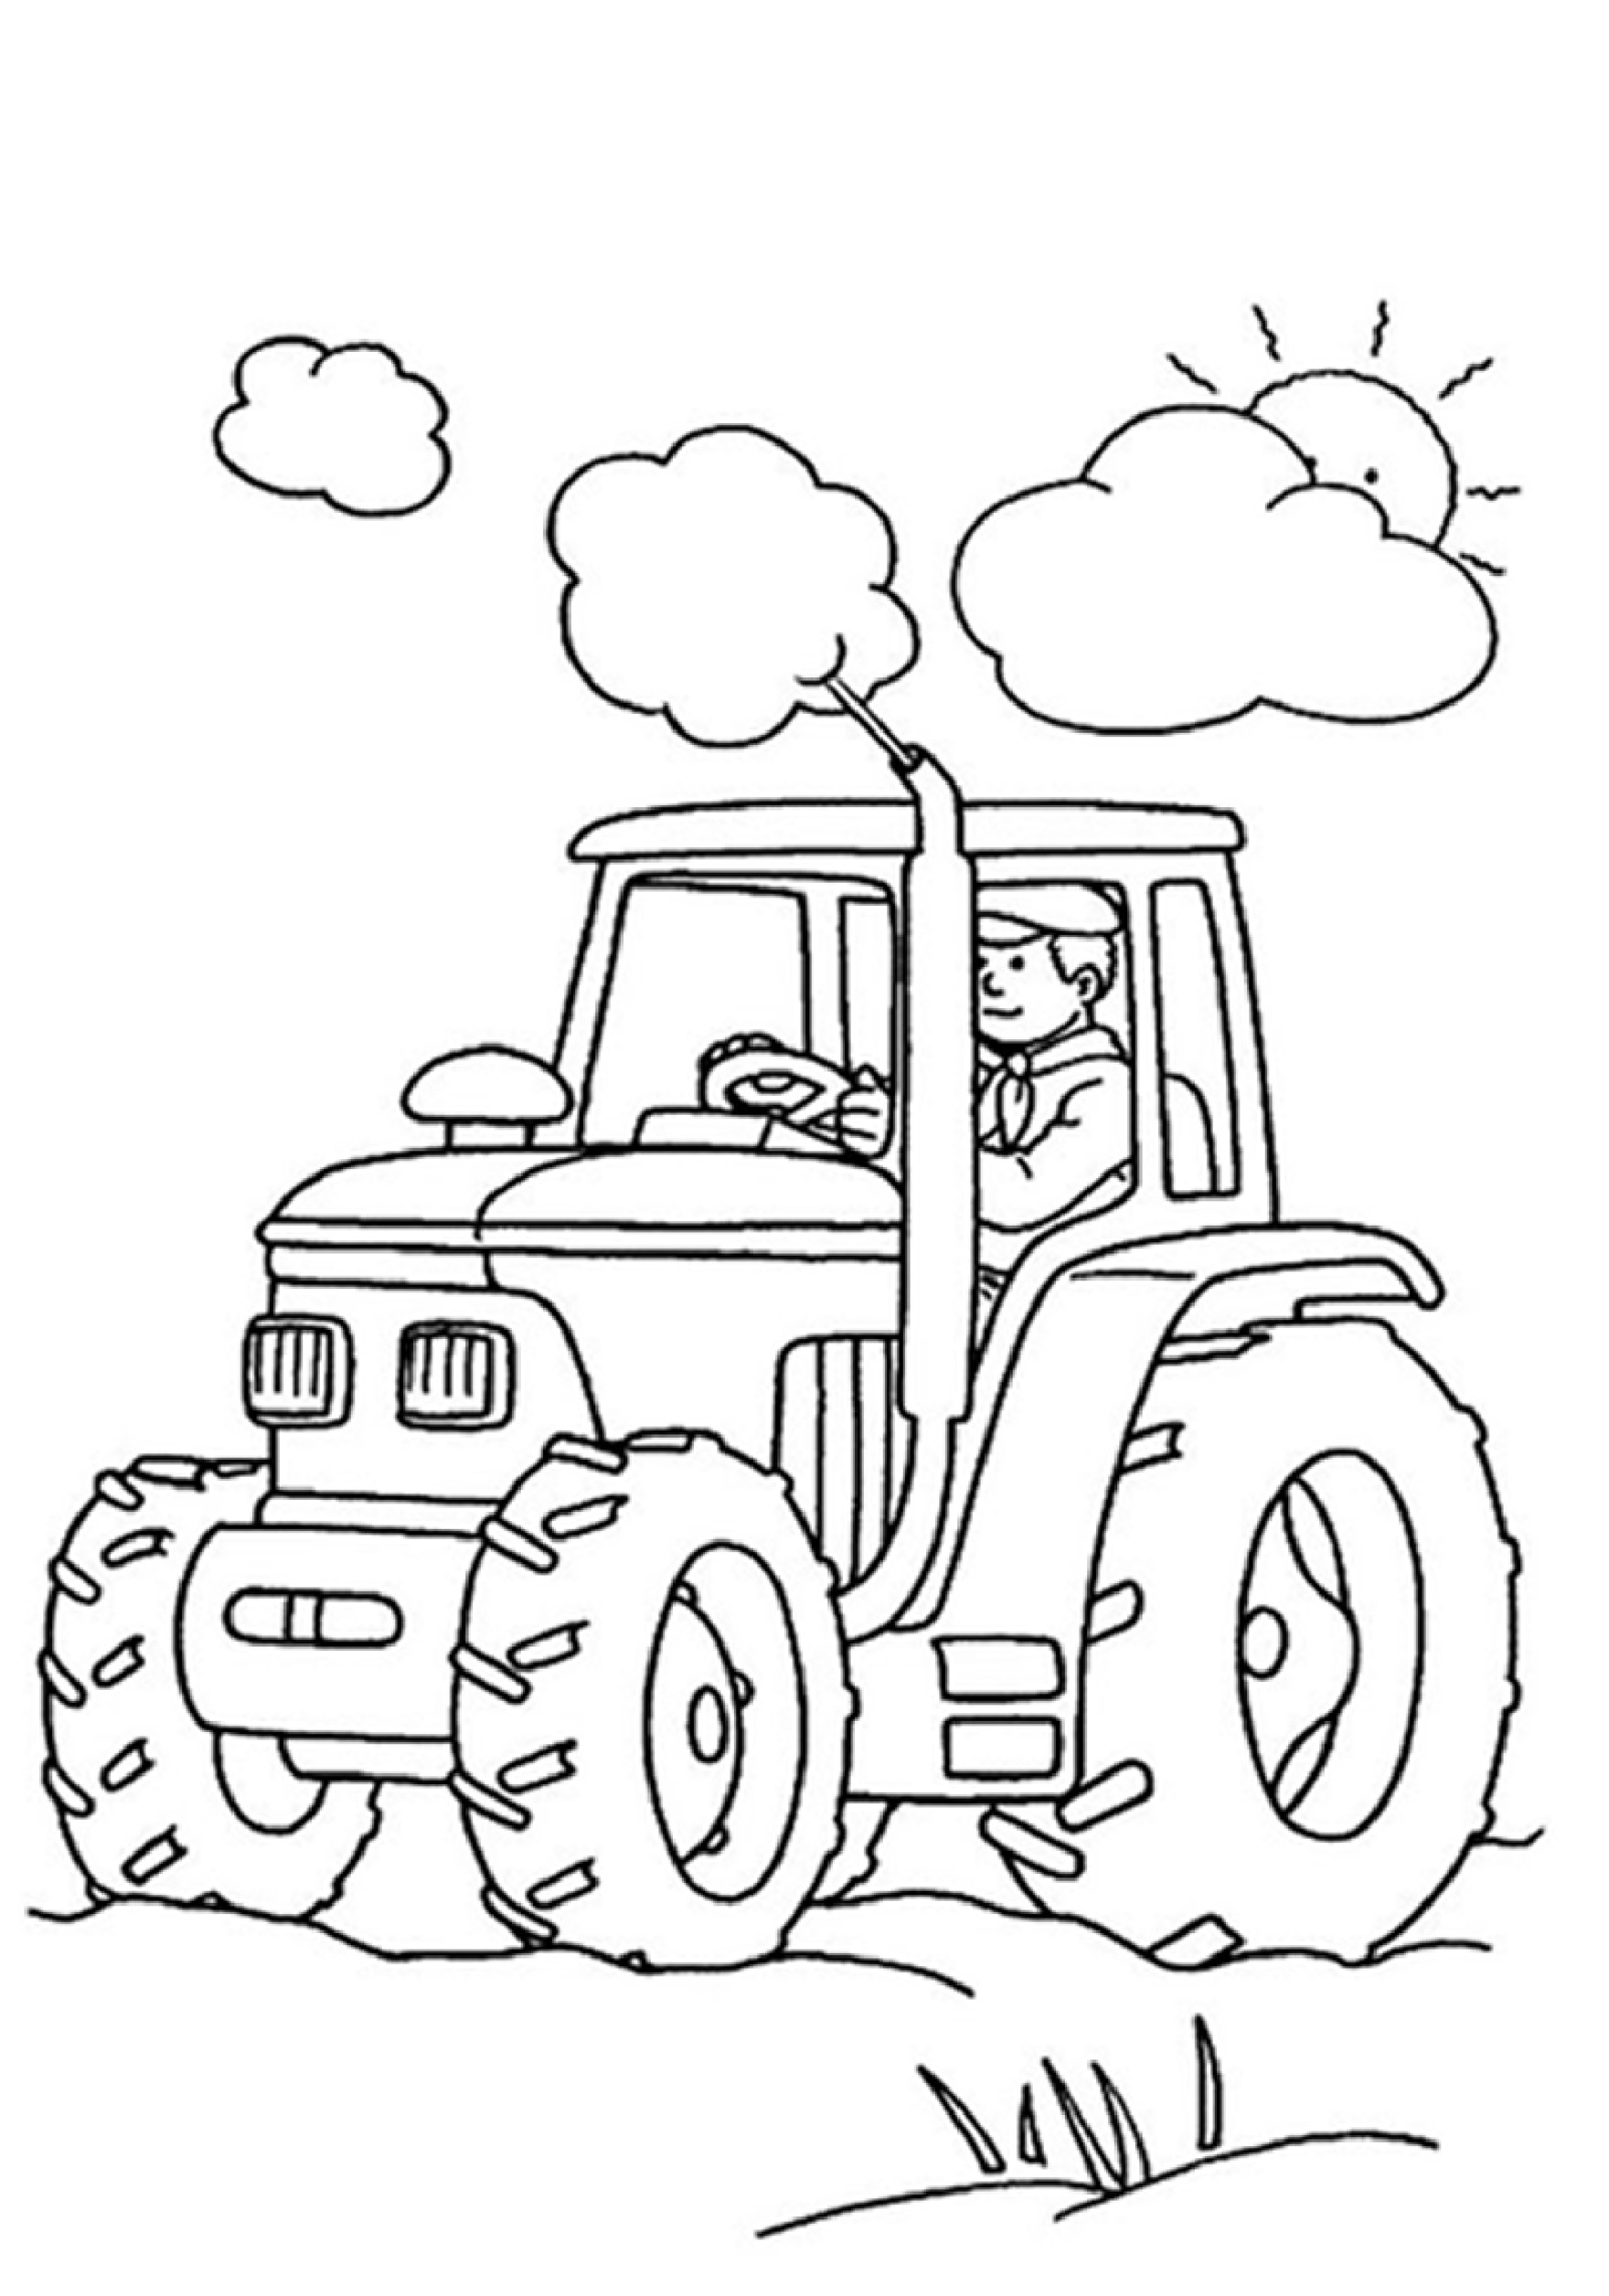 Printable Coloring Pages For Boys
 Coloring Town